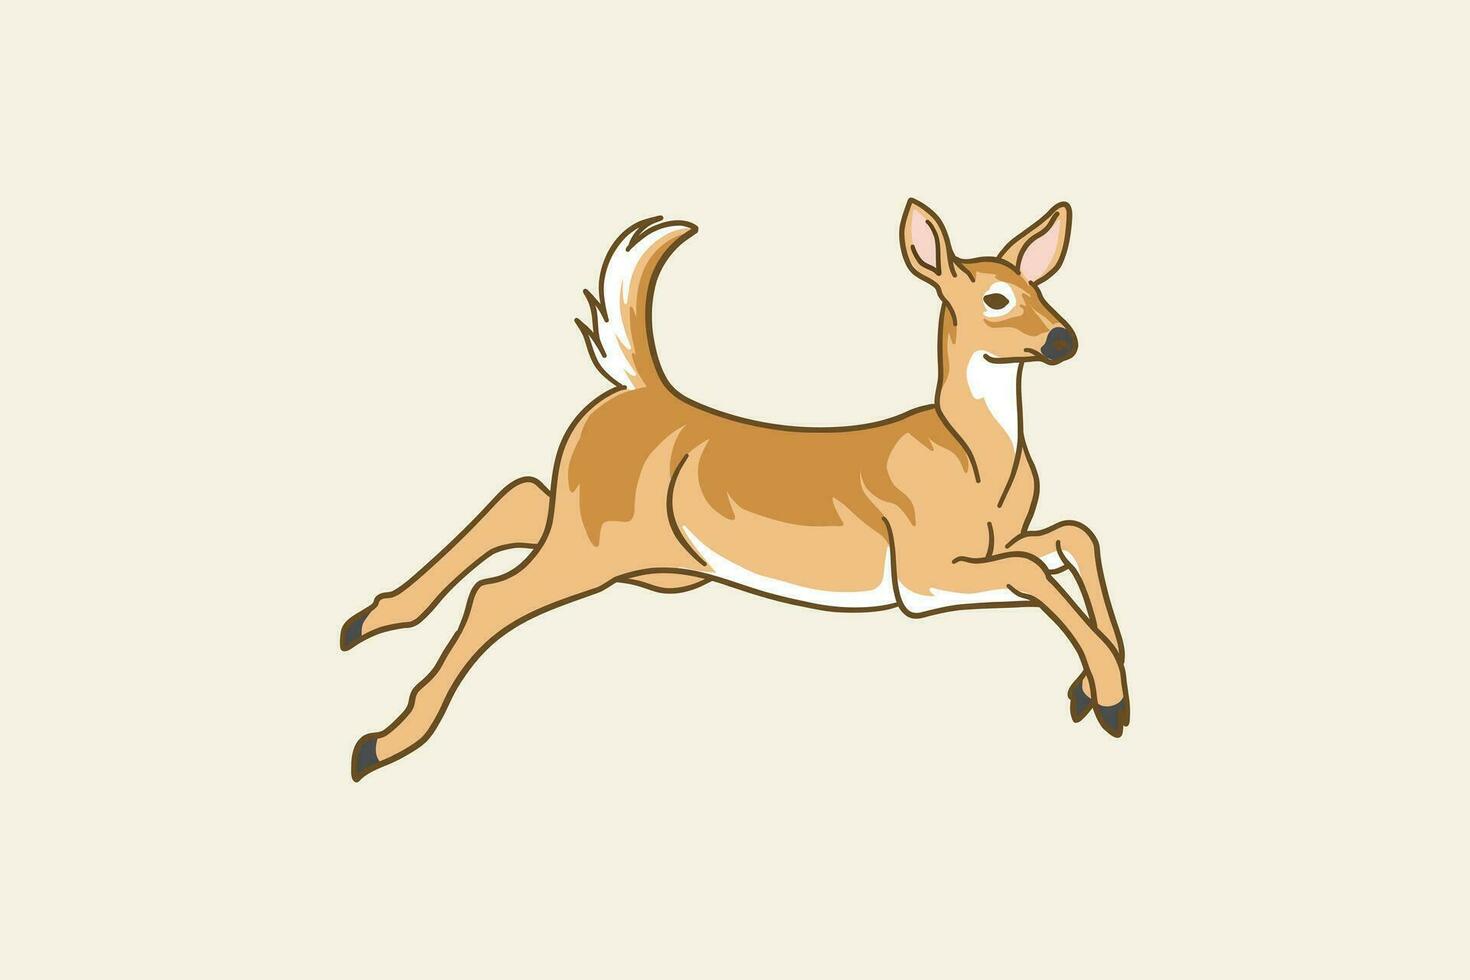 color illustration of a deer jumping vector